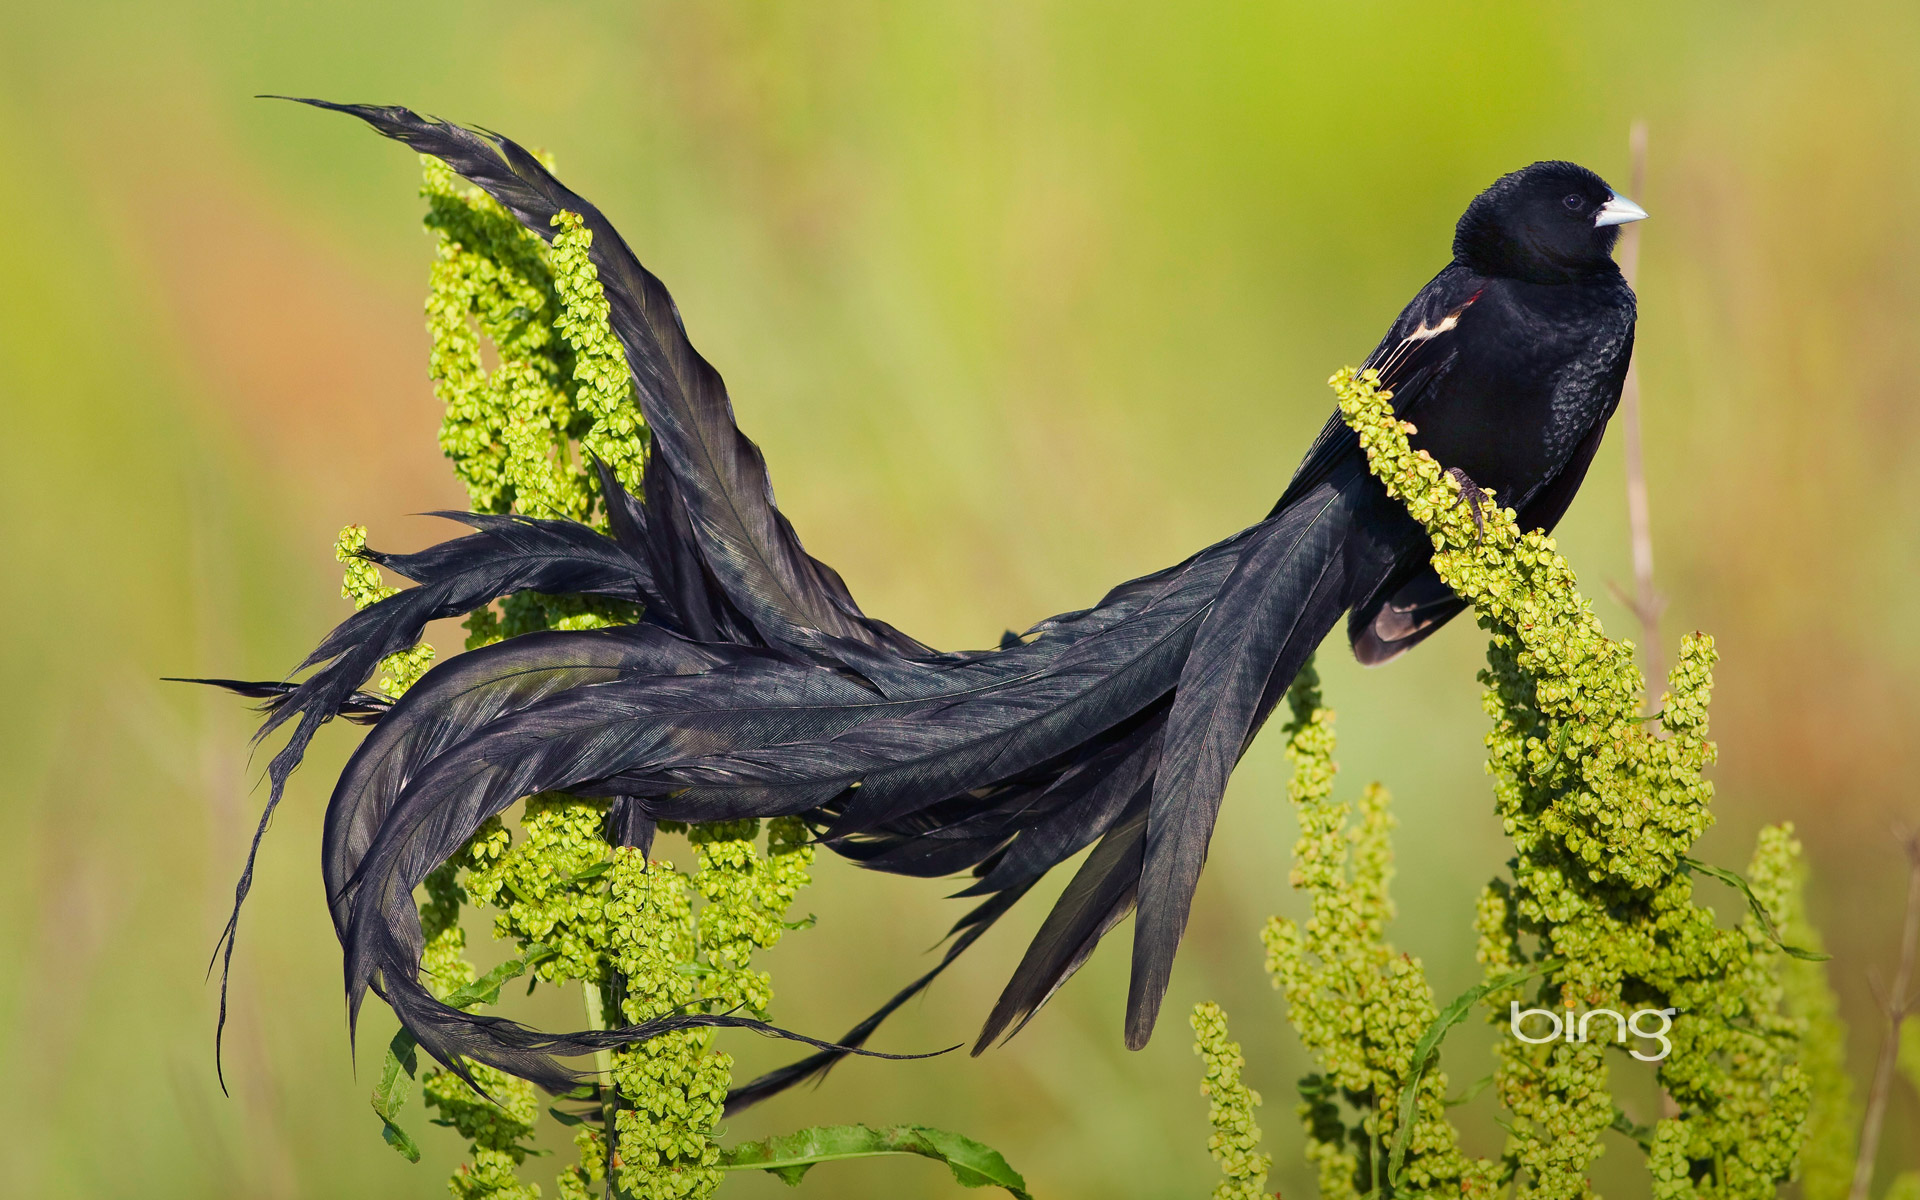 Long-tailed widowbird male in breeding plumage, Marievale Bird Sanctuary, South Africa